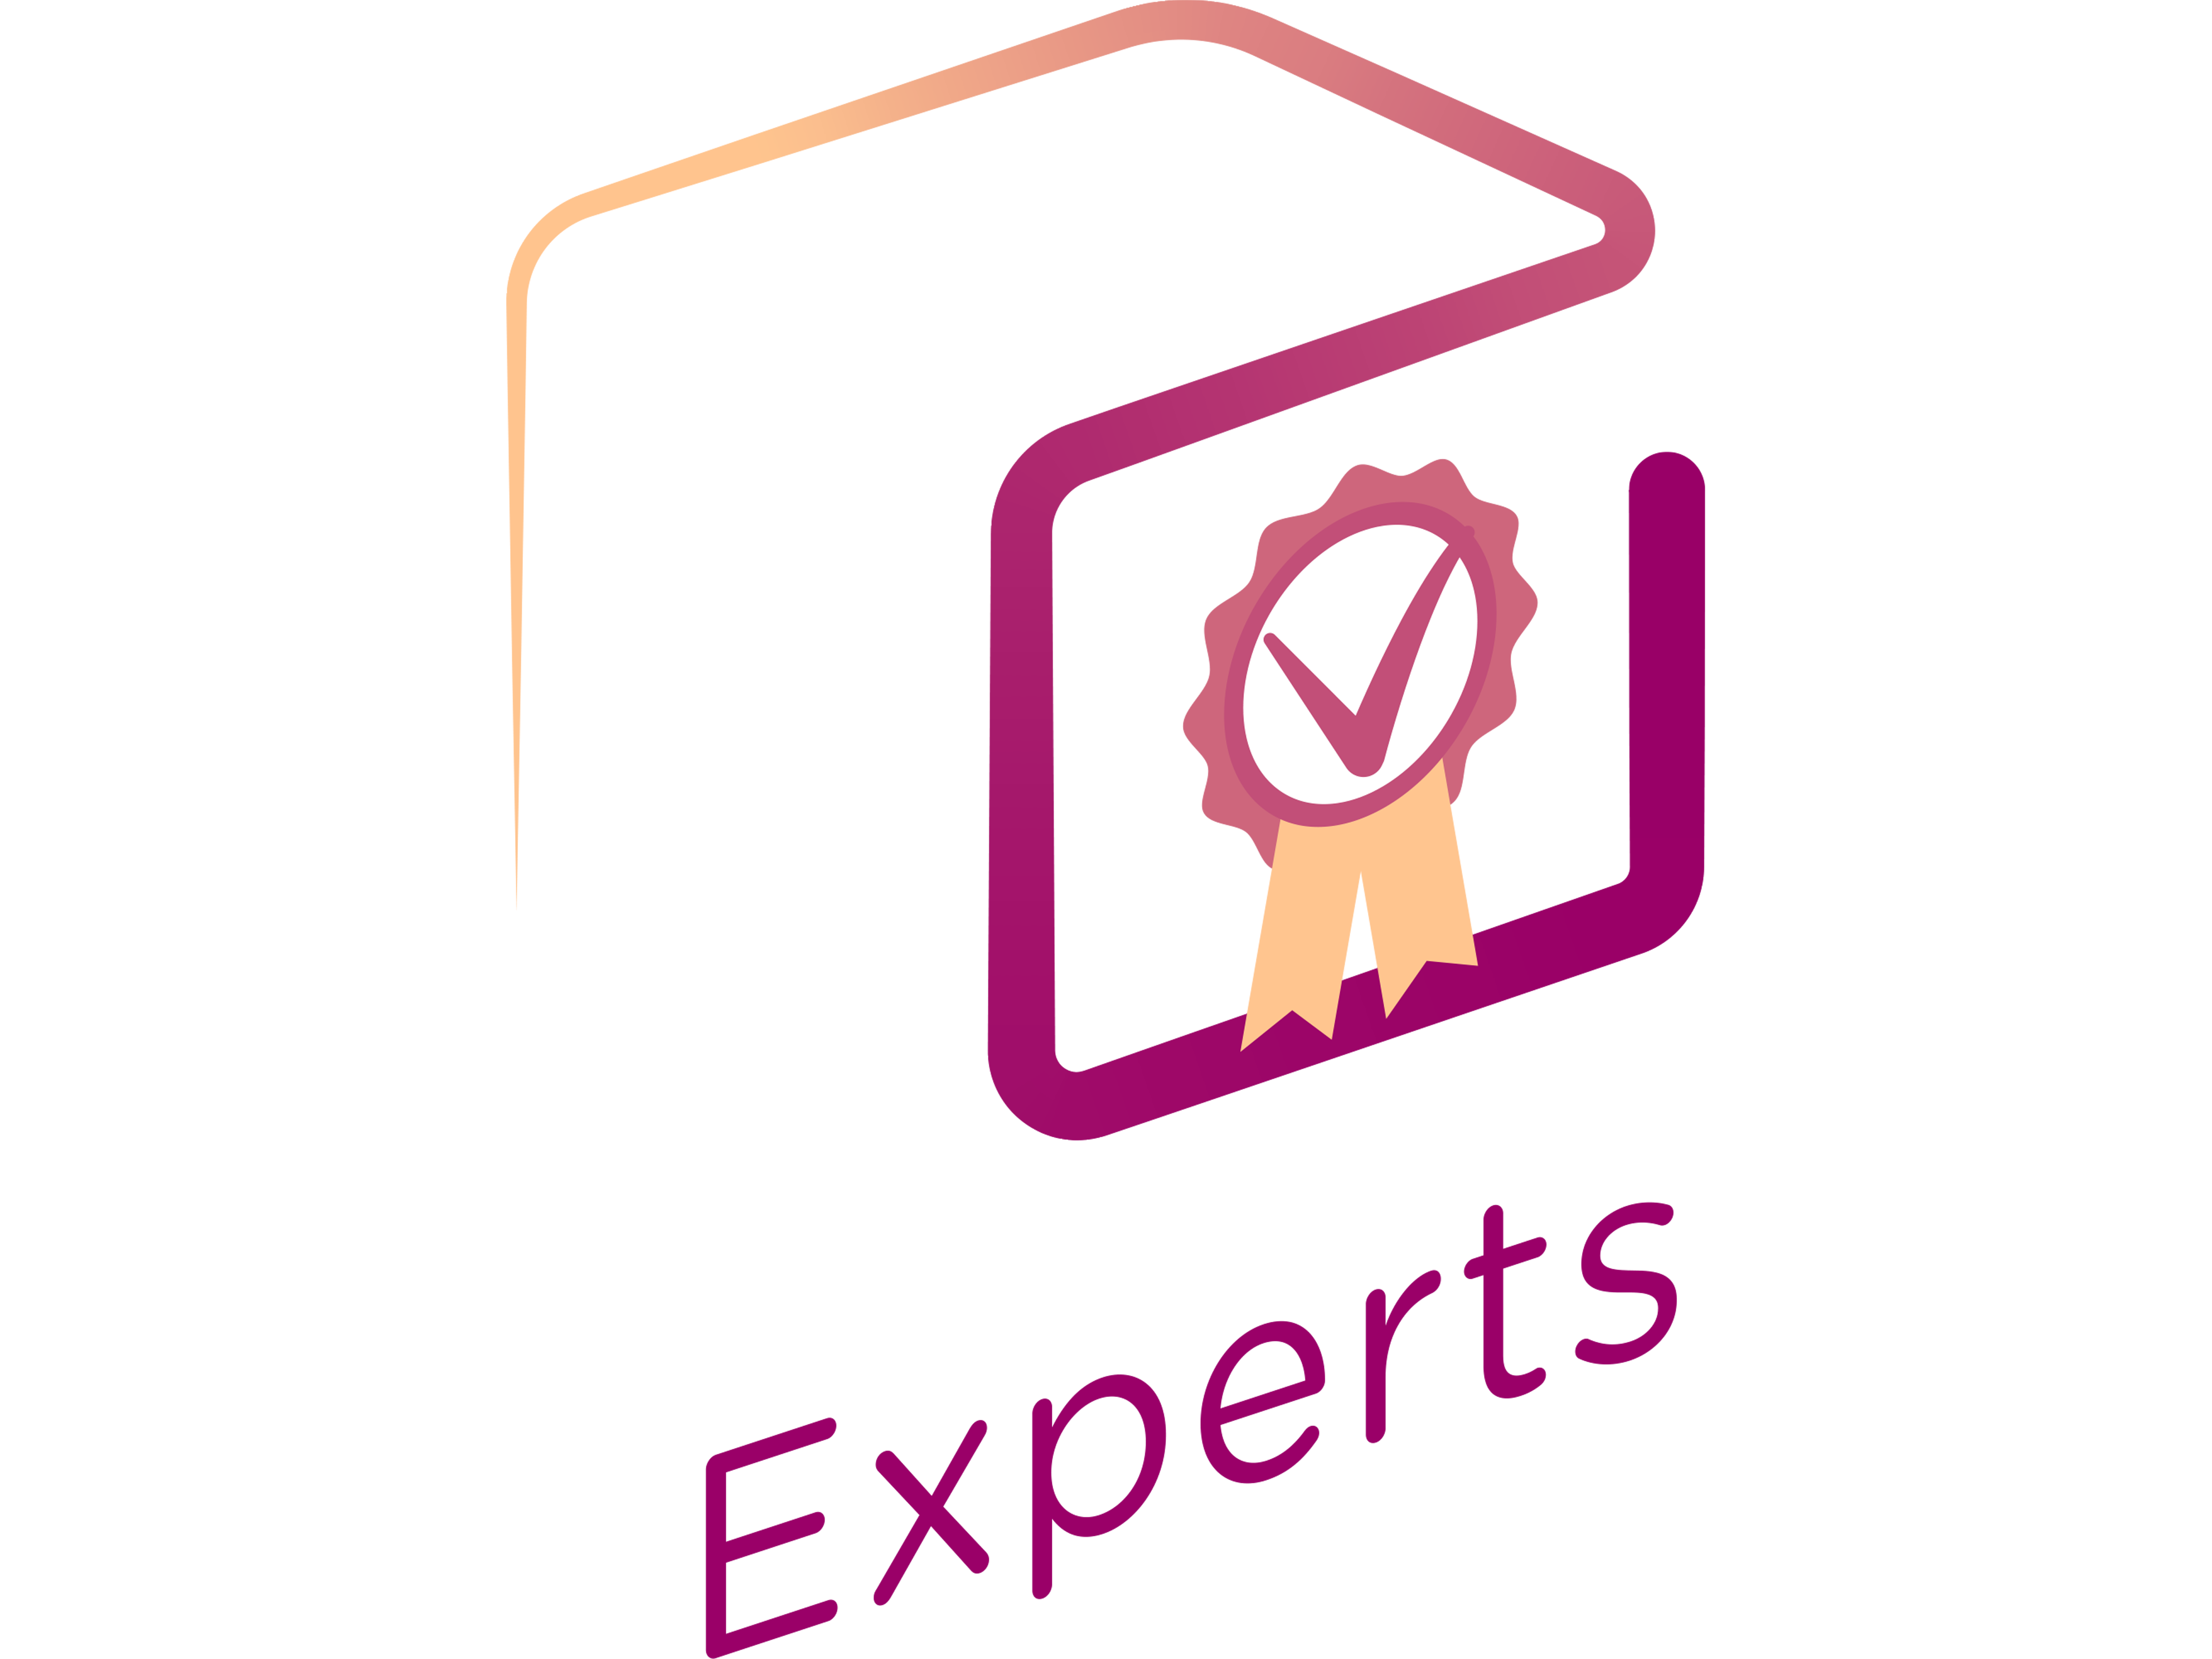 experts